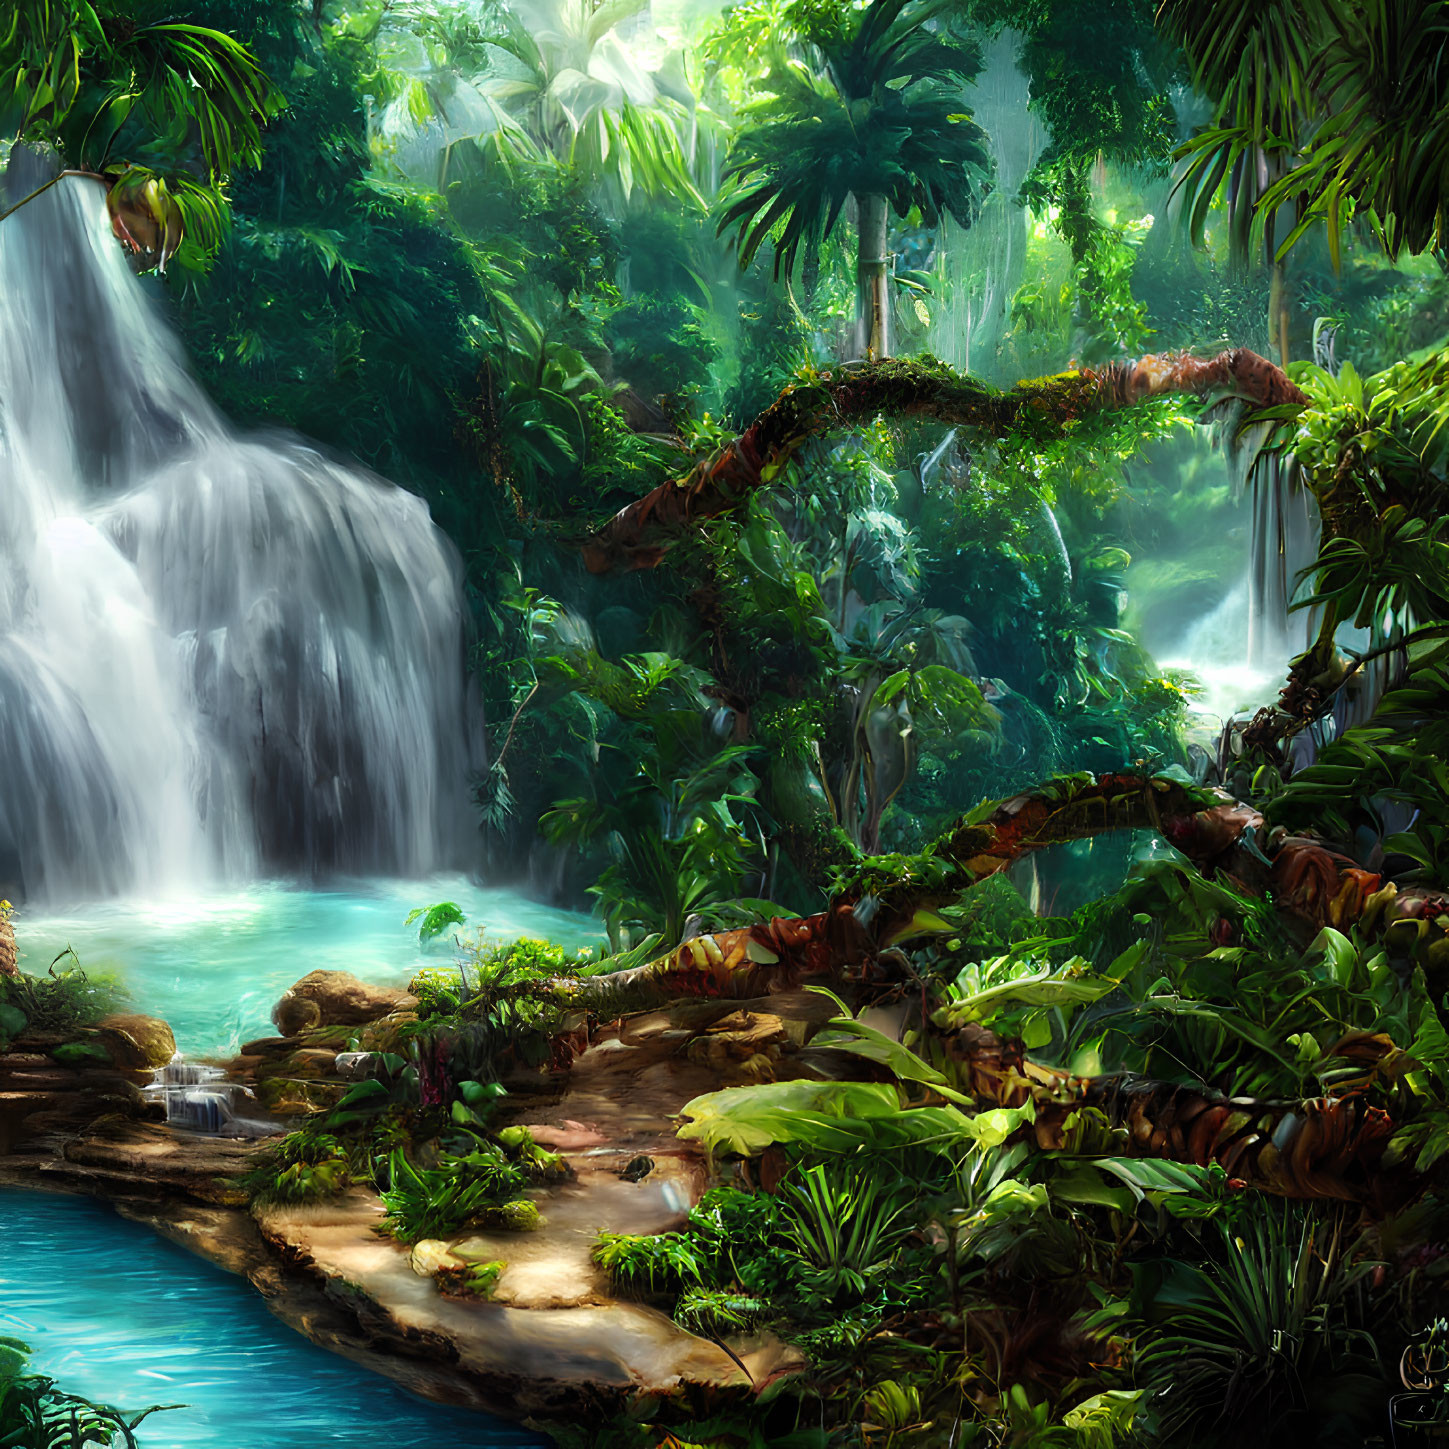 Serene forest scene: lush greenery, waterfalls, vibrant plants, and tranquil blue pond